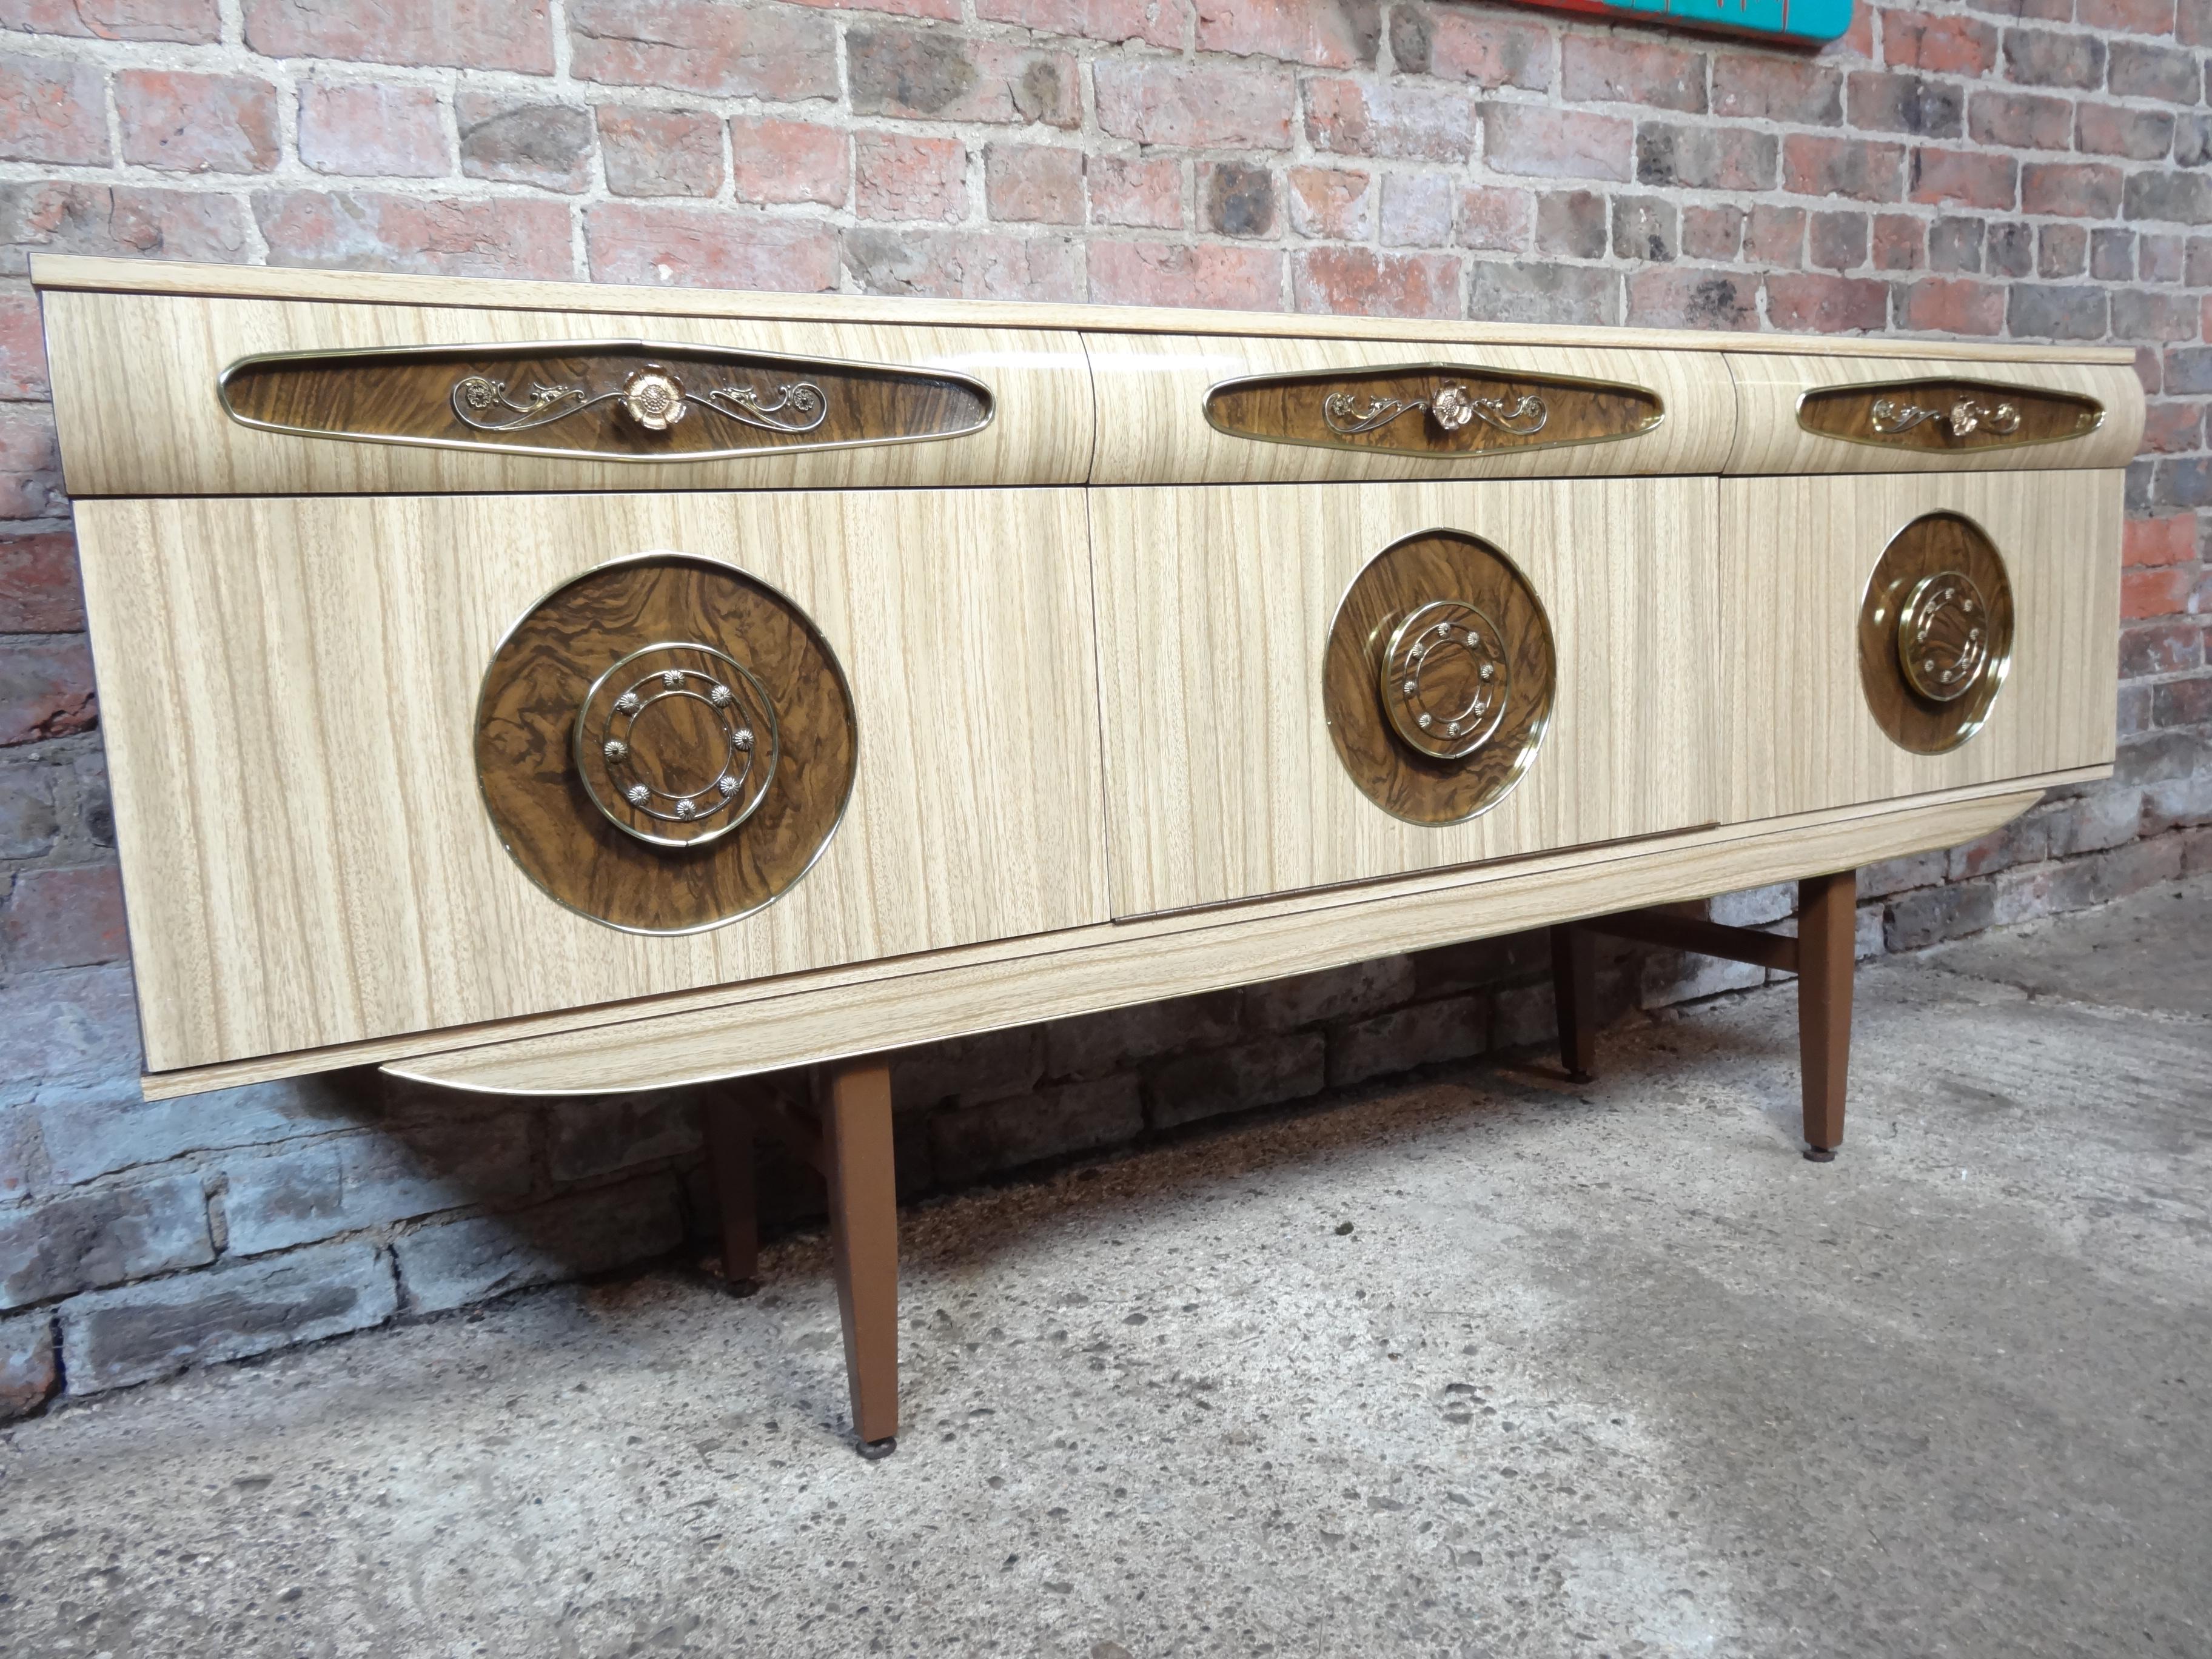 20th Century Sought after Vintage Retro Italian Sideboard with Brass Handles from 1950s For Sale